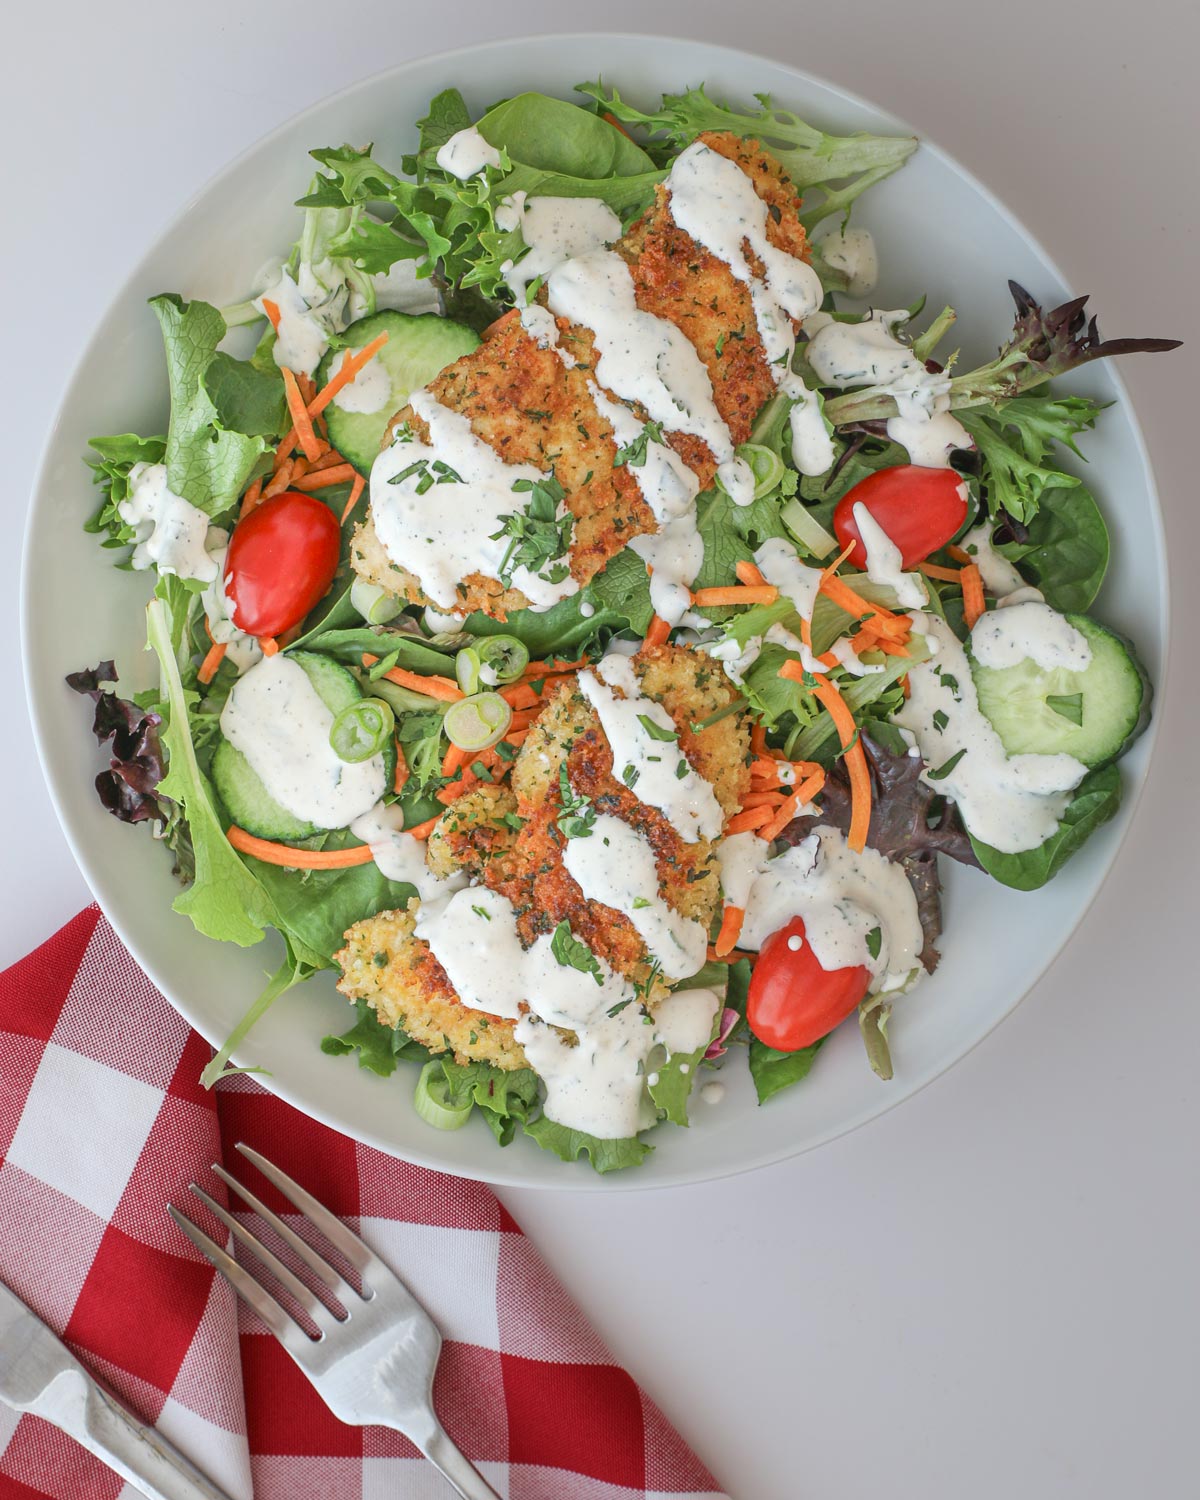 large green salad with creamy garlic dressing drizzled over the top.